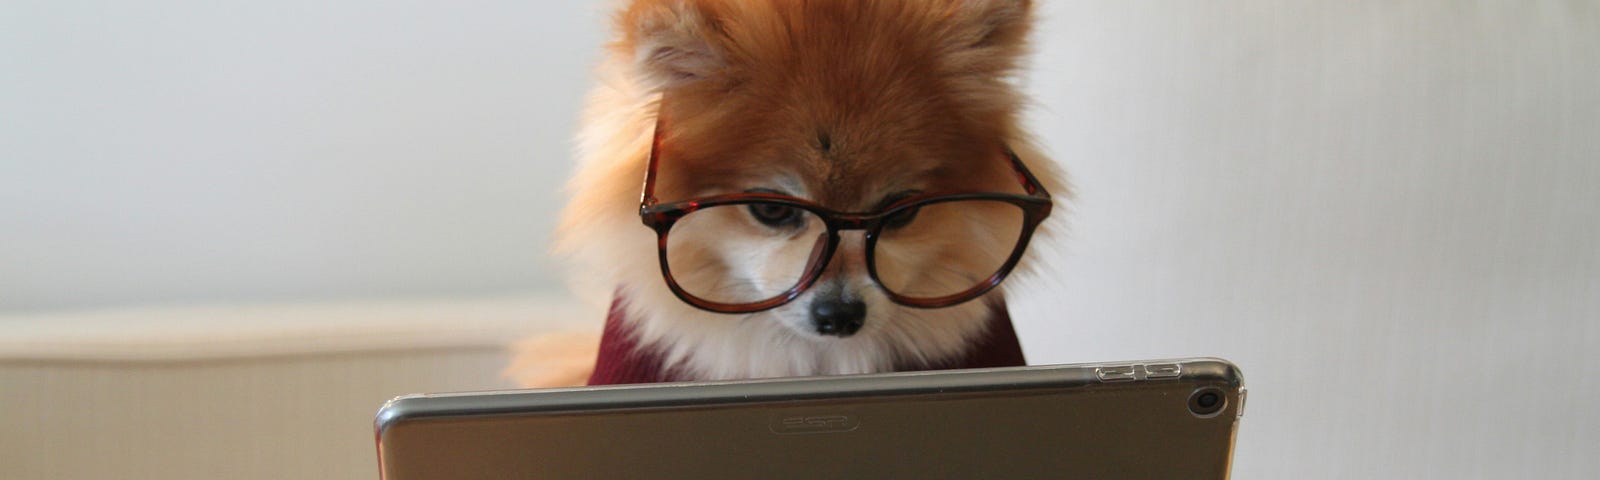 a small, cute dog wearing glasses ‘works’ at a laptop computer